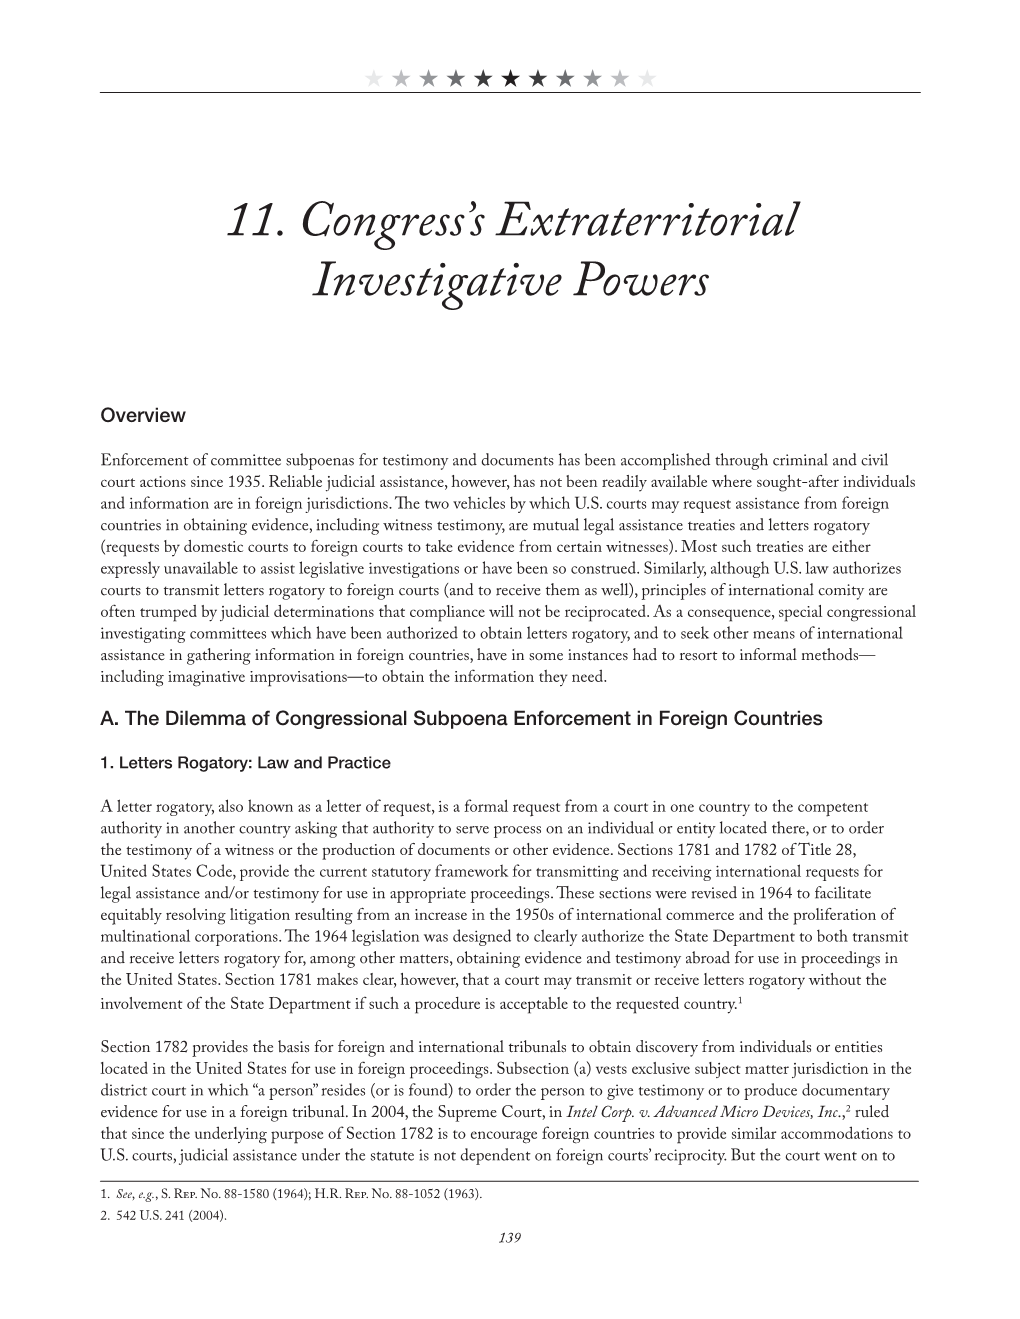 Chapter 11: Congress's Extraterritorial Investigative Powers